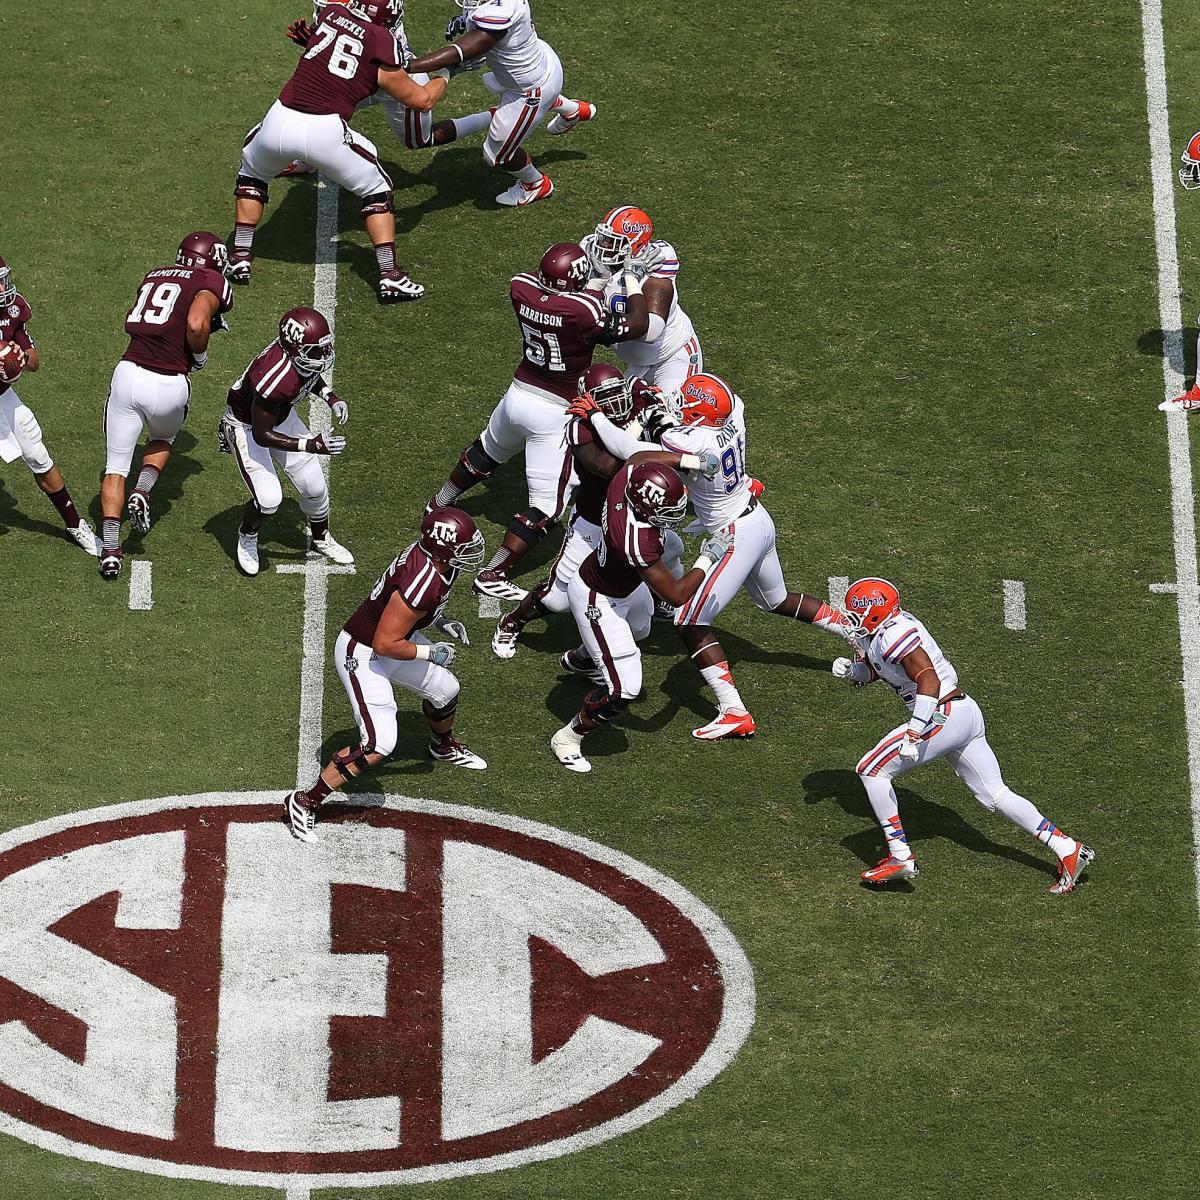 SEC College Football Rankings Where Texas A&M Ranks in New Conference